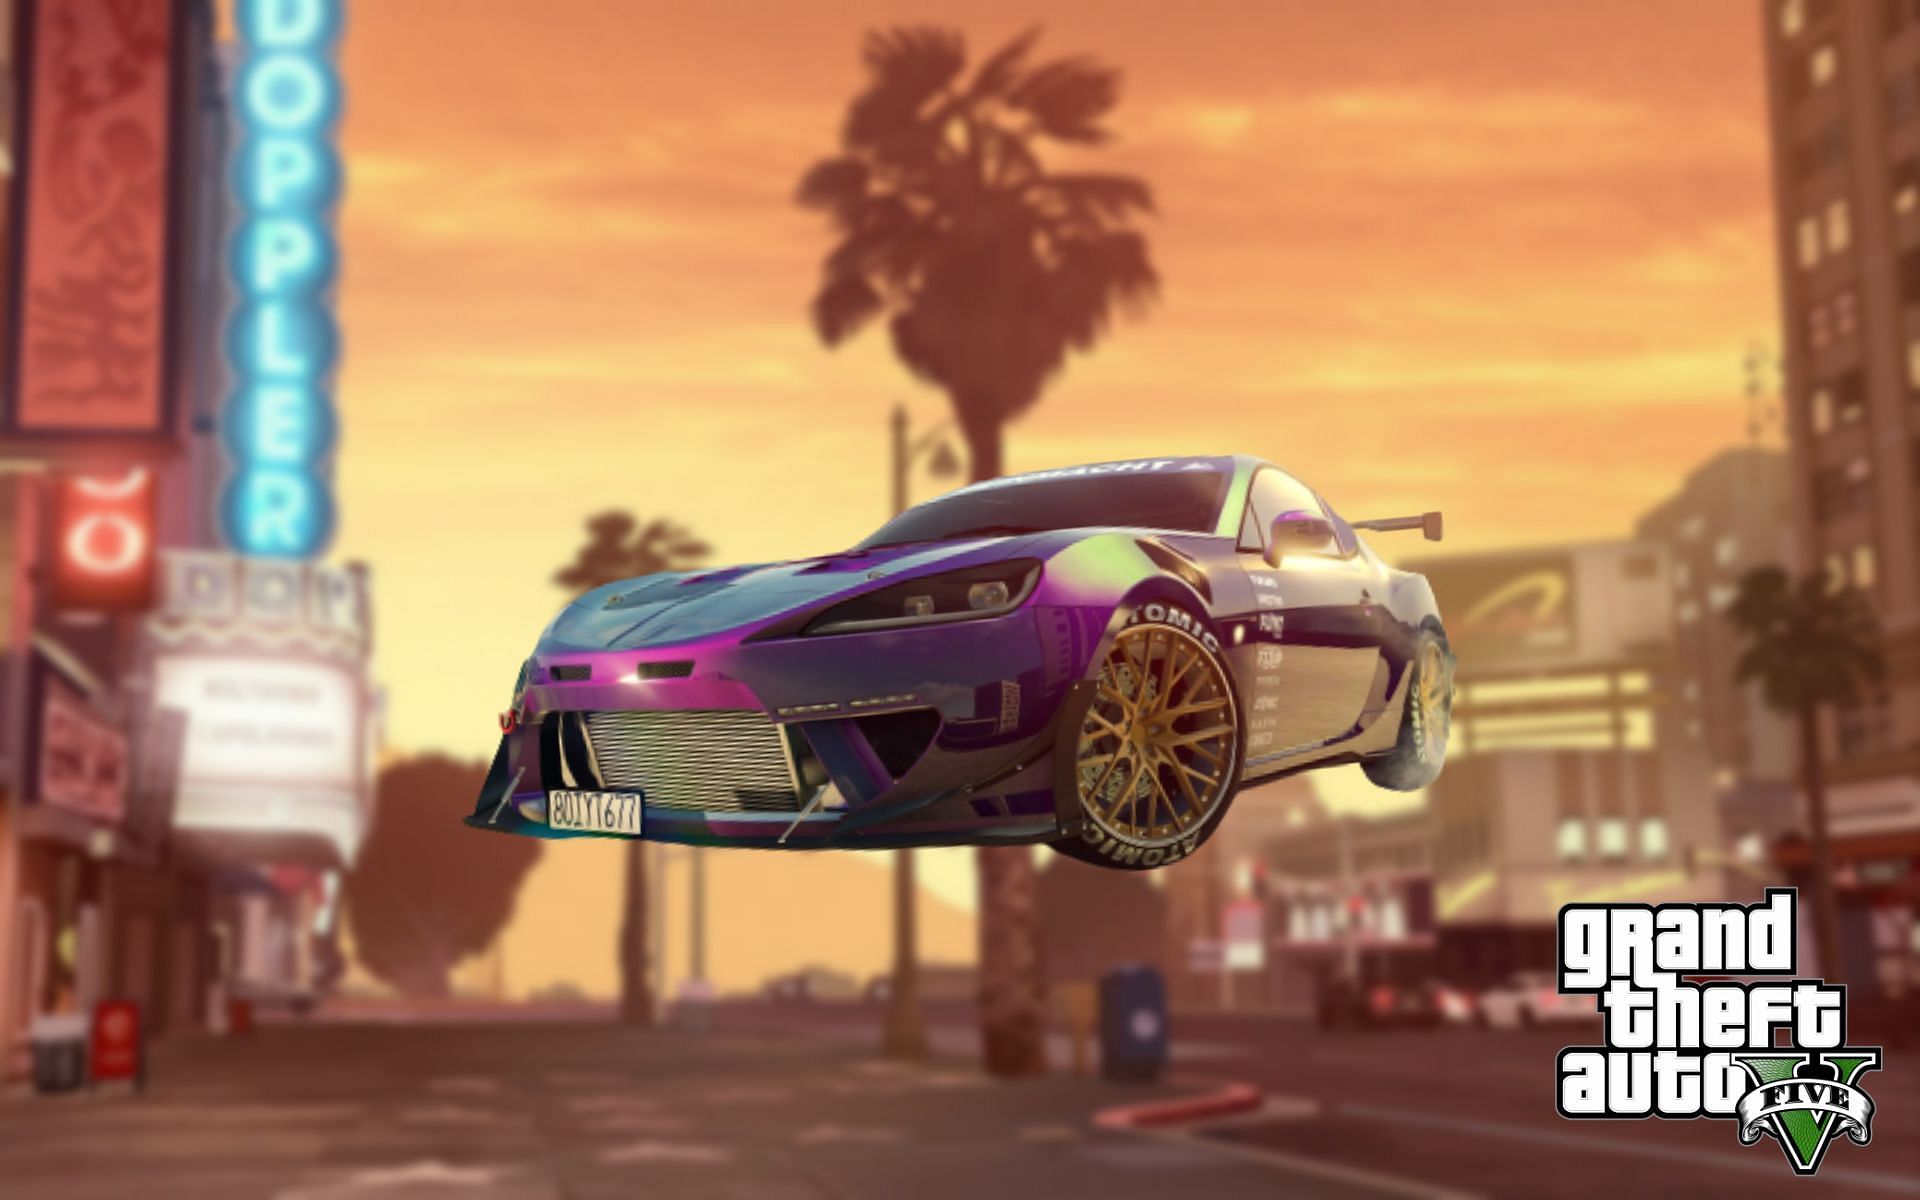 Details about new cars in GTA 5 nextgen edition revealed